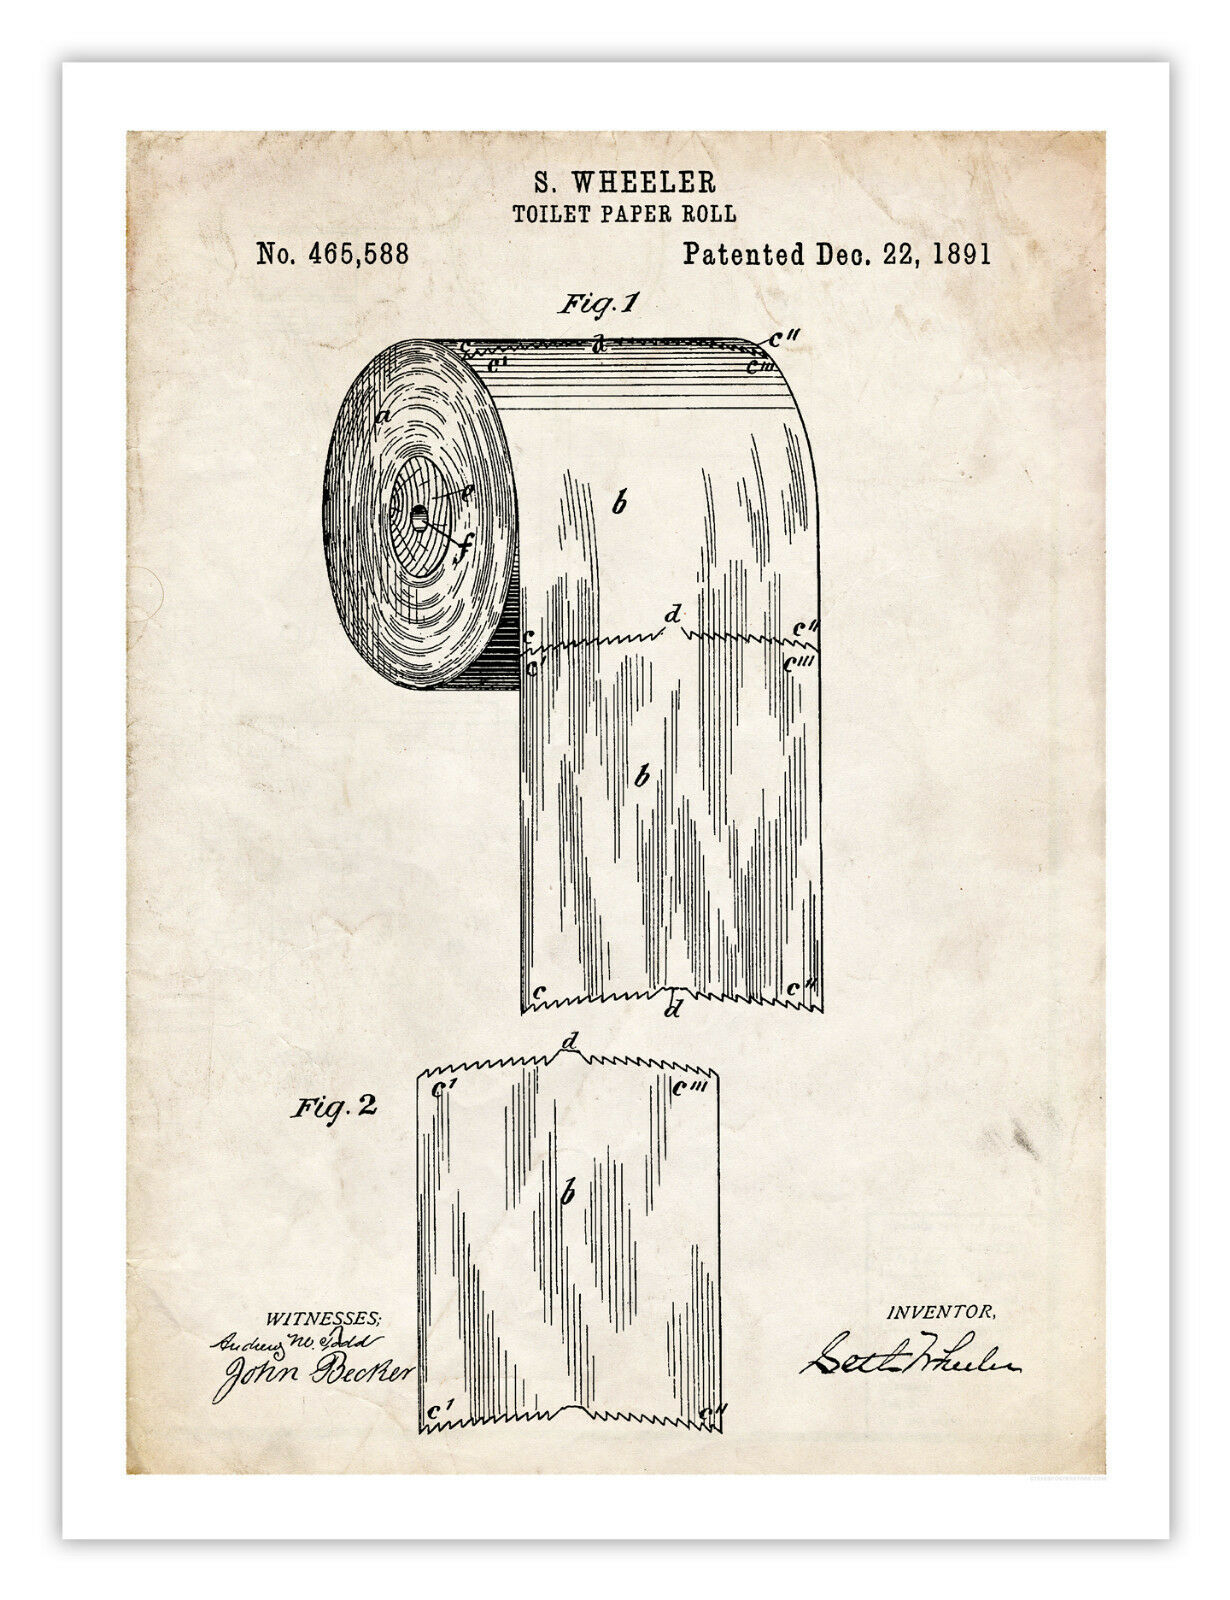 Who Invented Toilet Paper Roll?